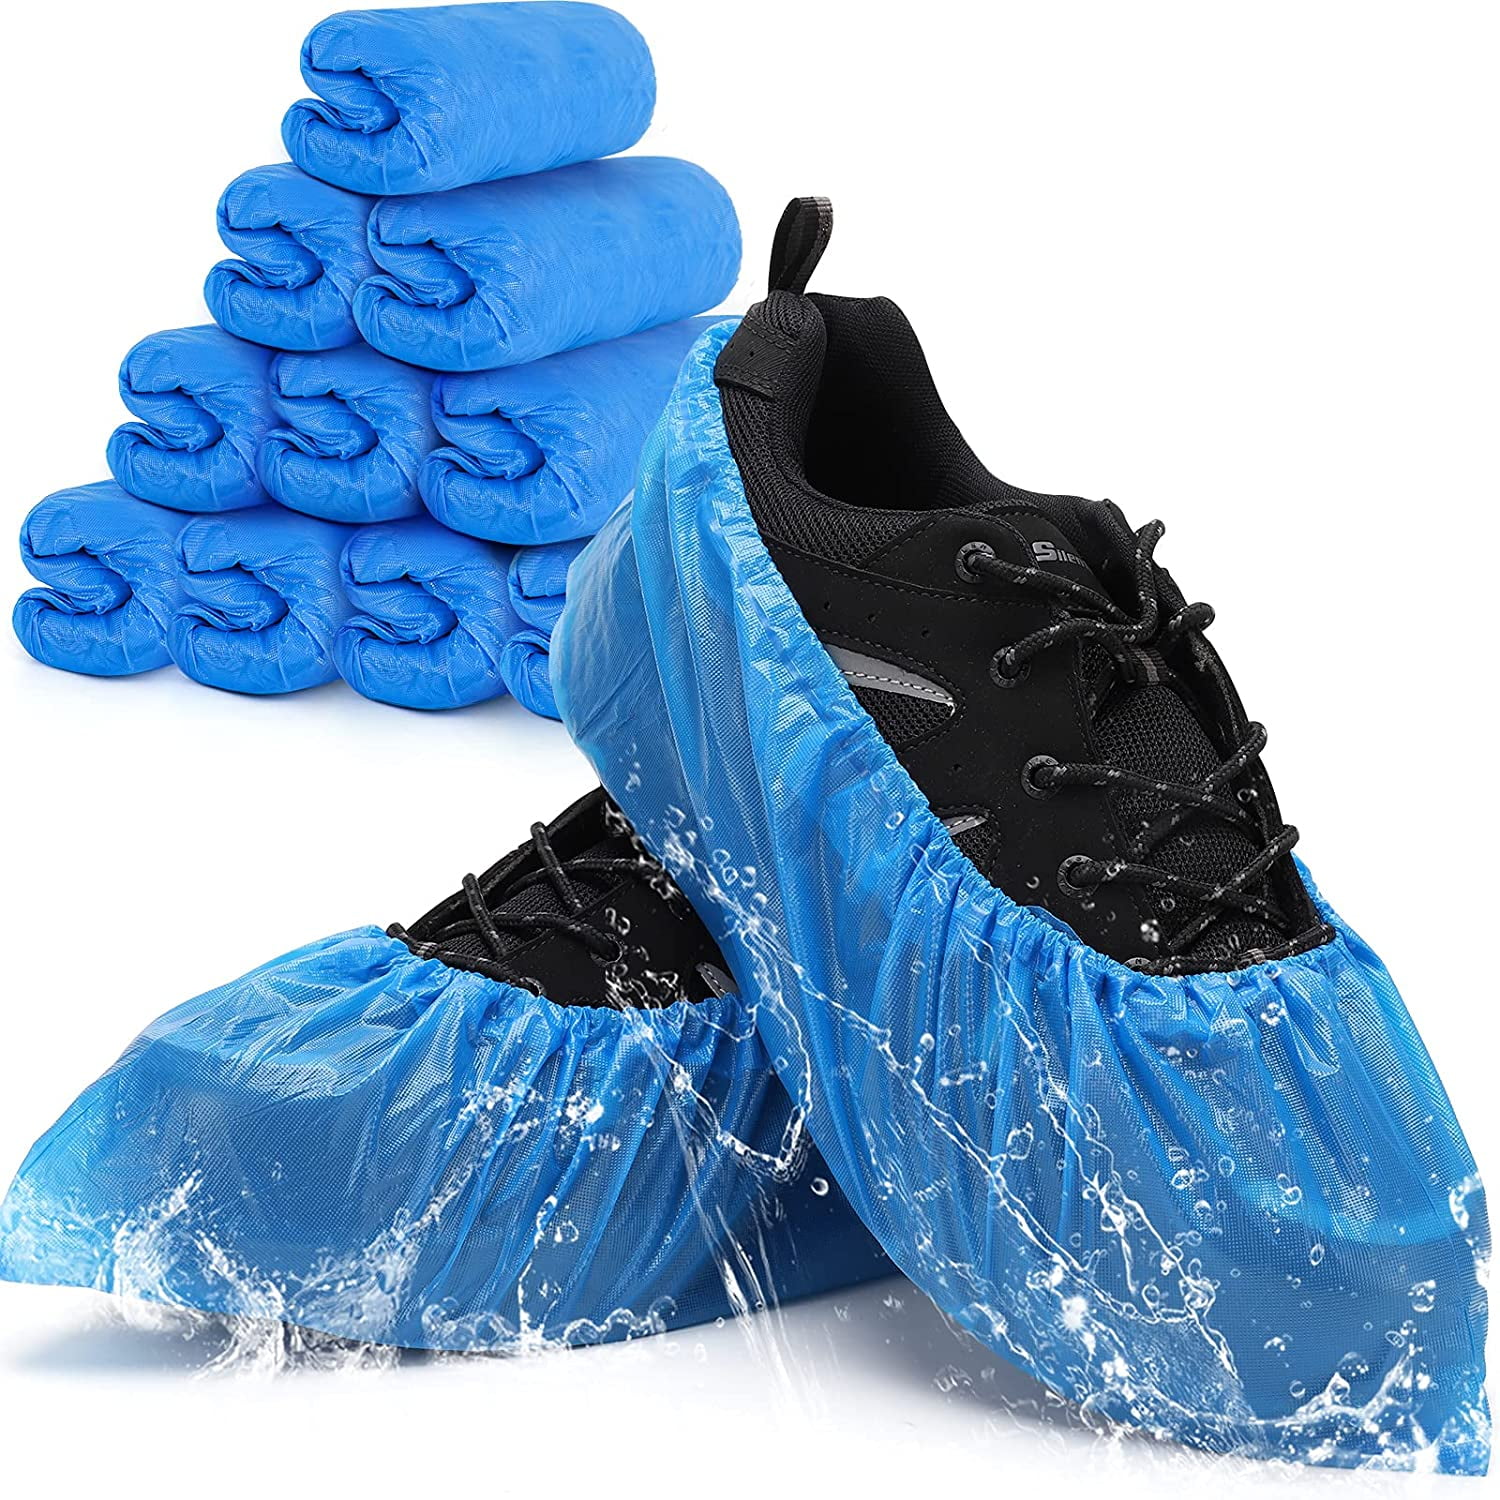 50 PCS Shoe Covers Disposable non Slip Shoe Covers for Indoors Travel Outdoor Waterproof Shoe Covers for Rain 